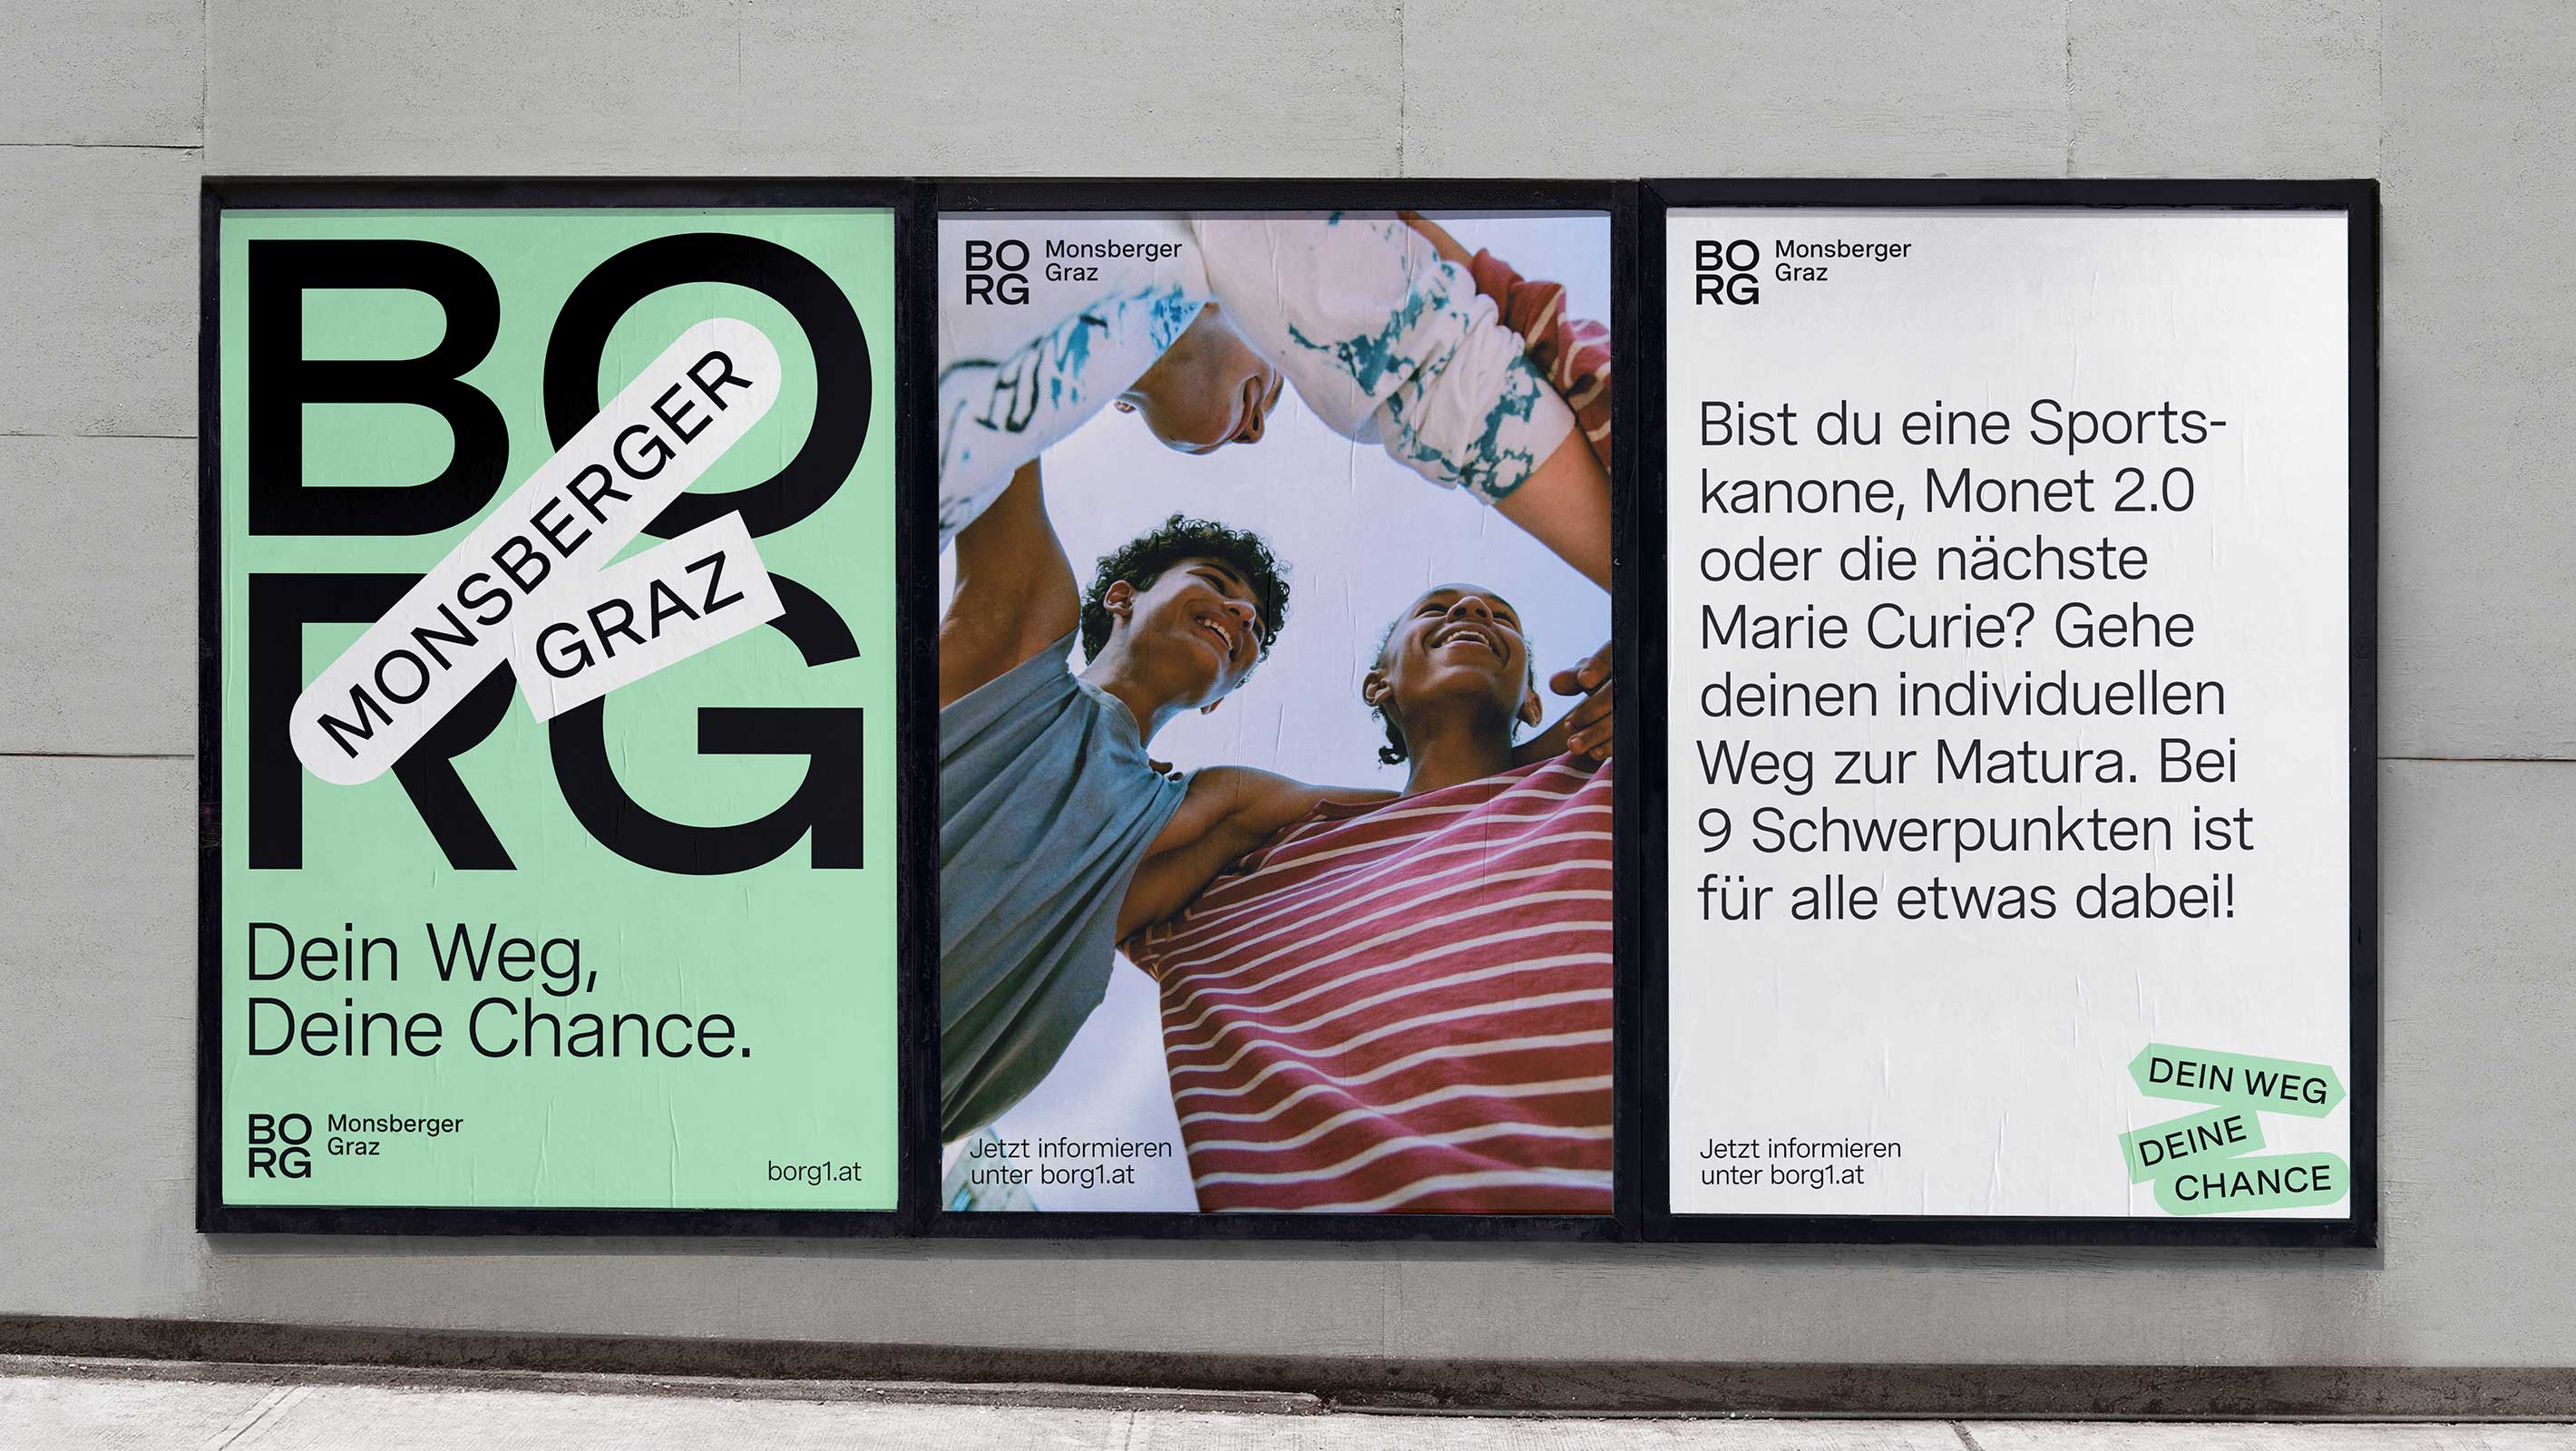 Three large advertising posters of BORG Monsberger next to each other with the first showing the logo and a slogan, the second showing three students in a circle having fun and the third showing a playful text about the school.